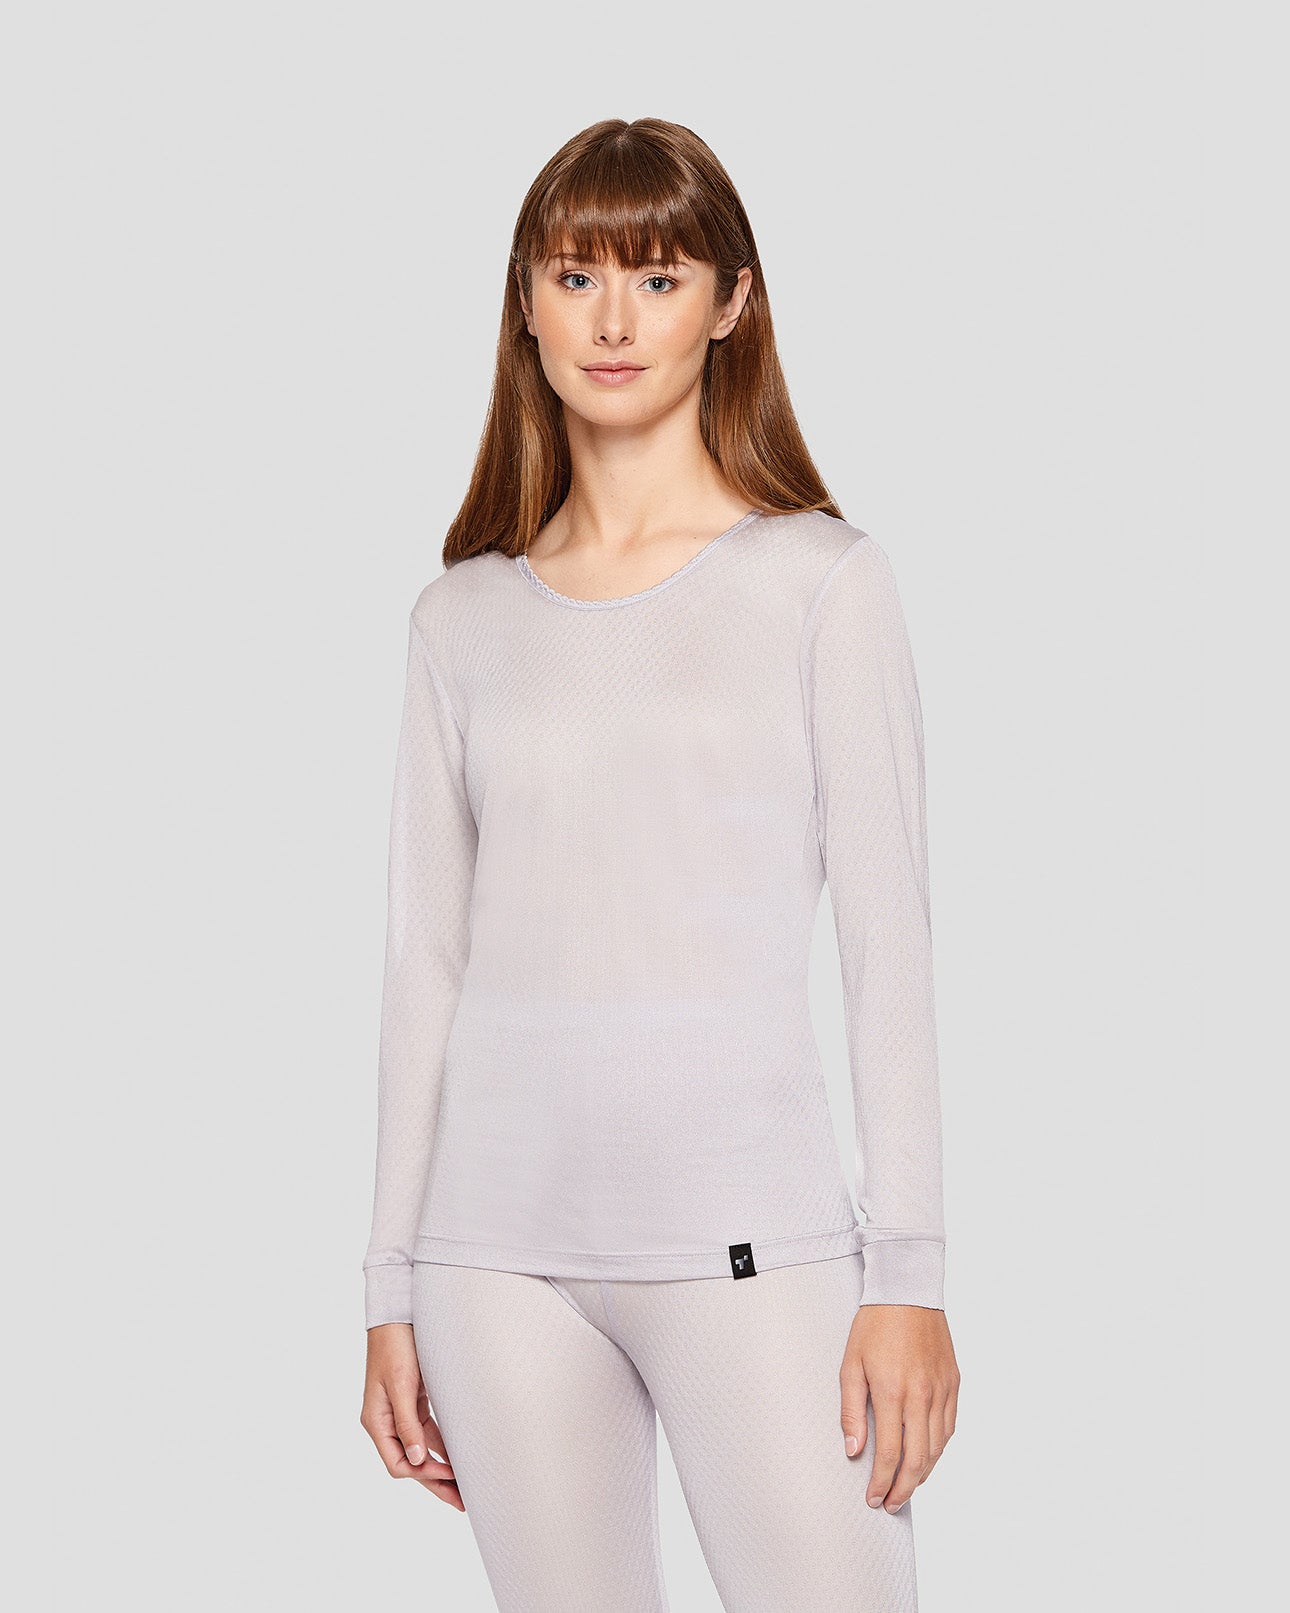  Terramar womens Terramar Women's Thermasilk Pointelle Camisole  Base Layer Tops, Dusty Berry, X-Small : Clothing, Shoes & Jewelry